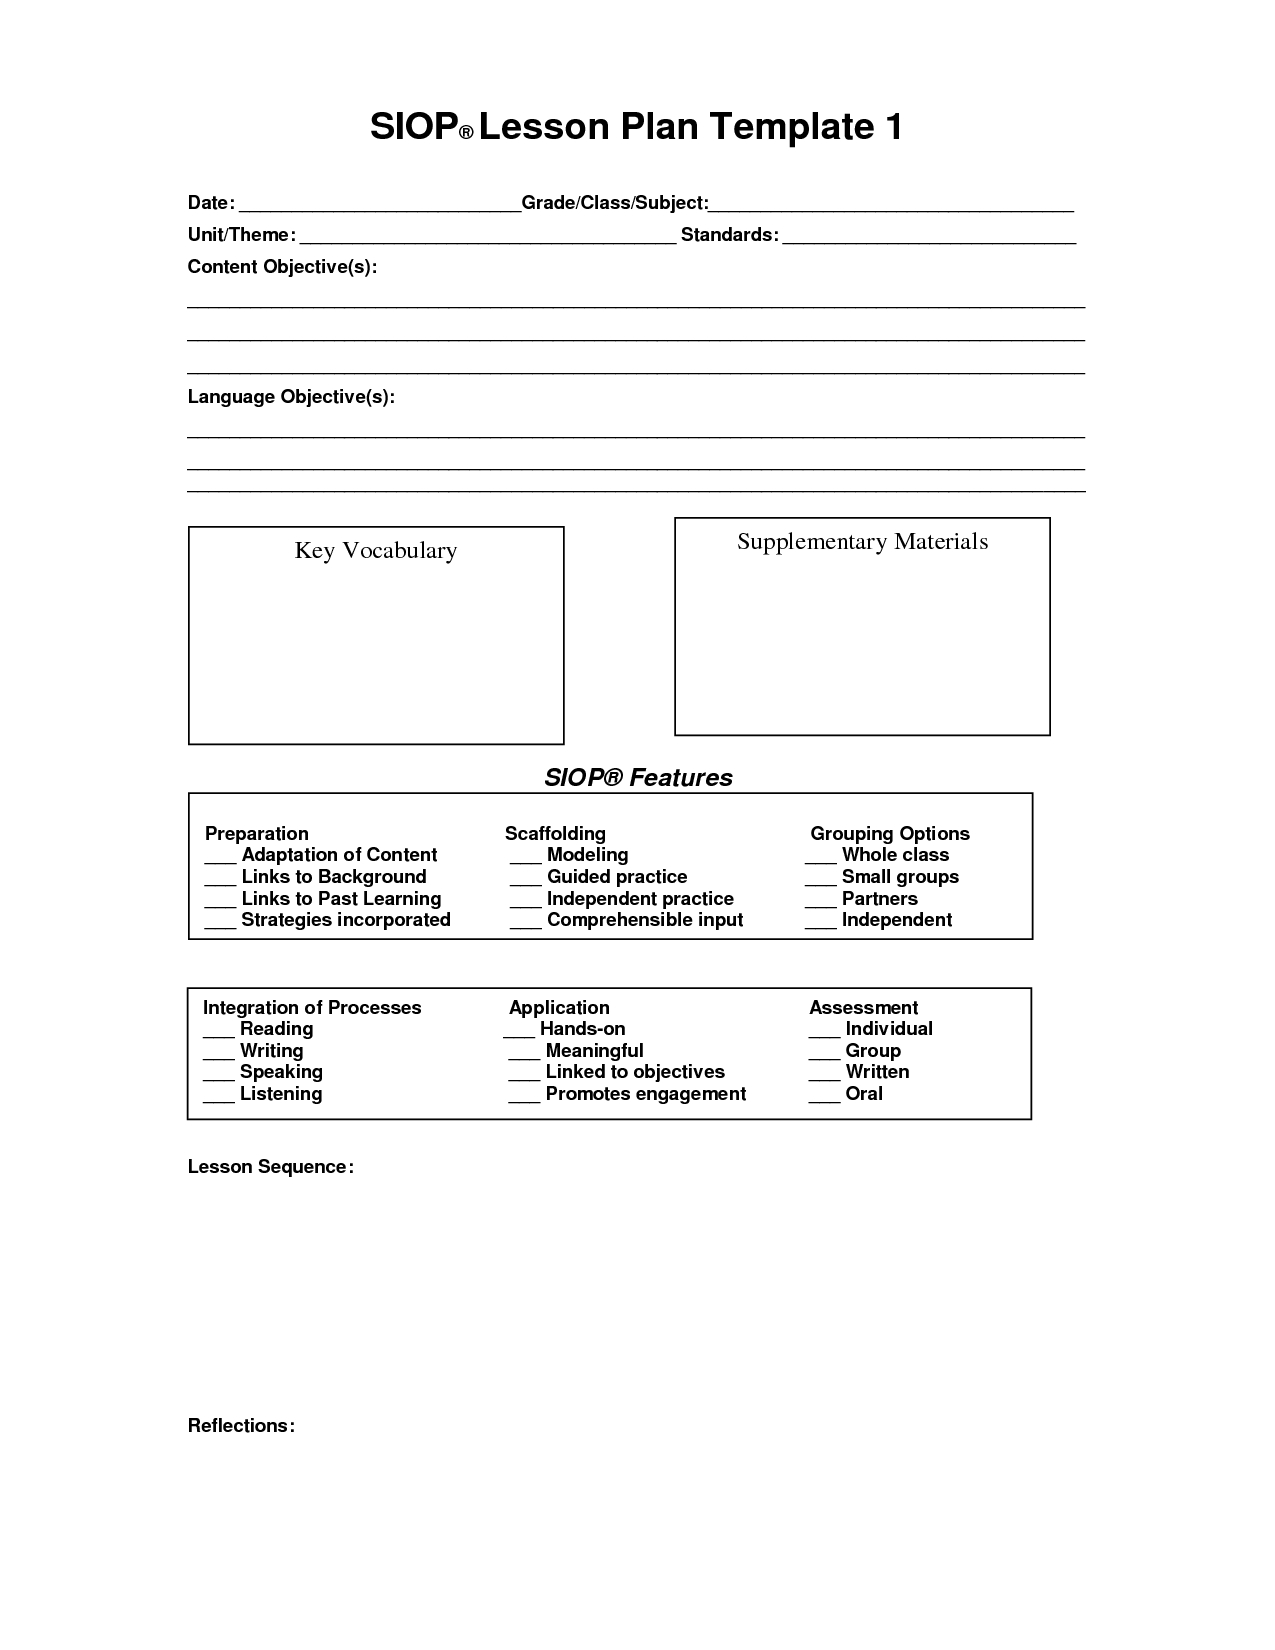 Siop Lesson Plan Template 1 Rptf7Wvy | Lesson Plan Template